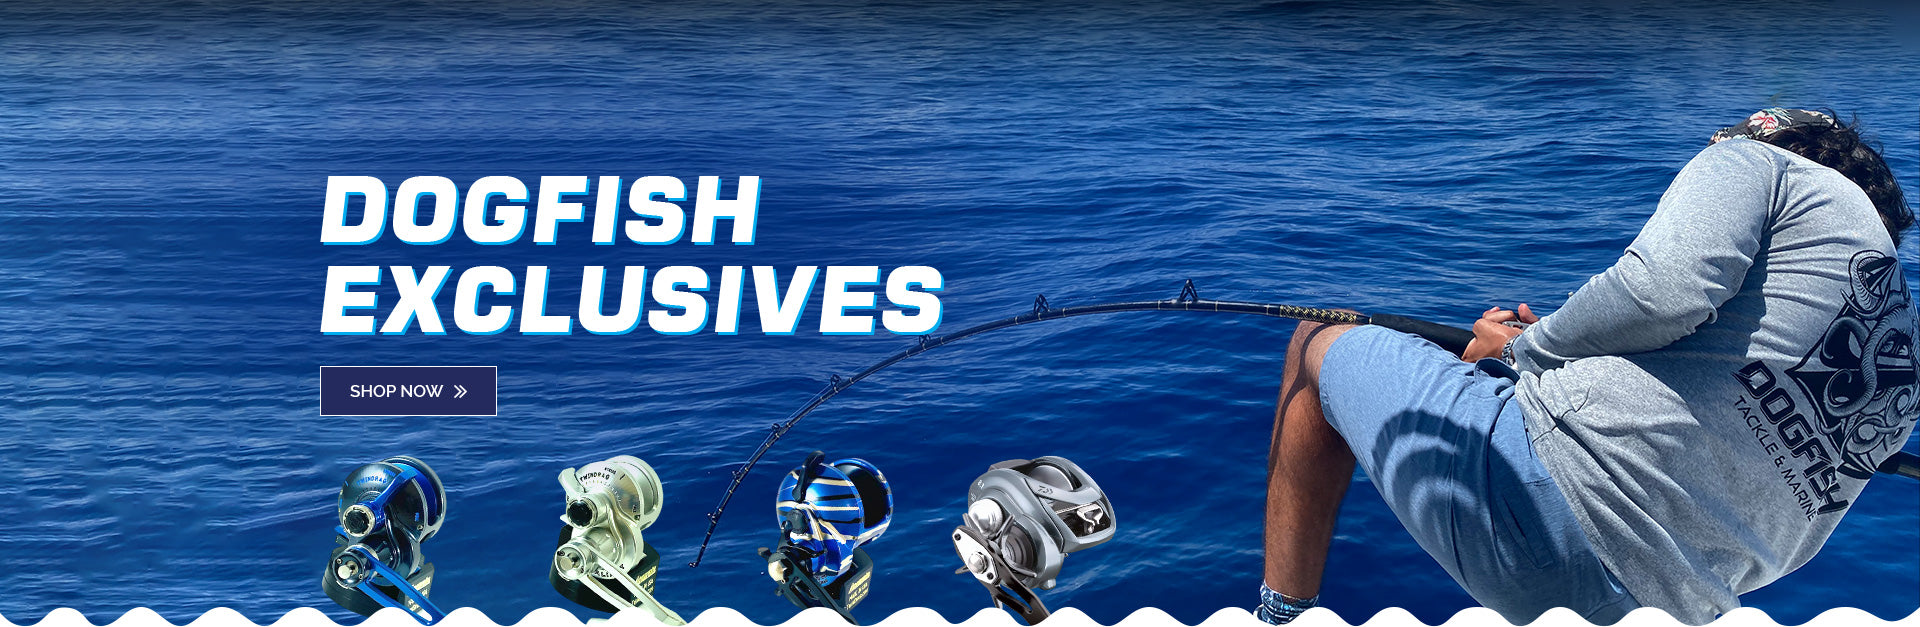 Boat and Tackle Premium Fishing Gear